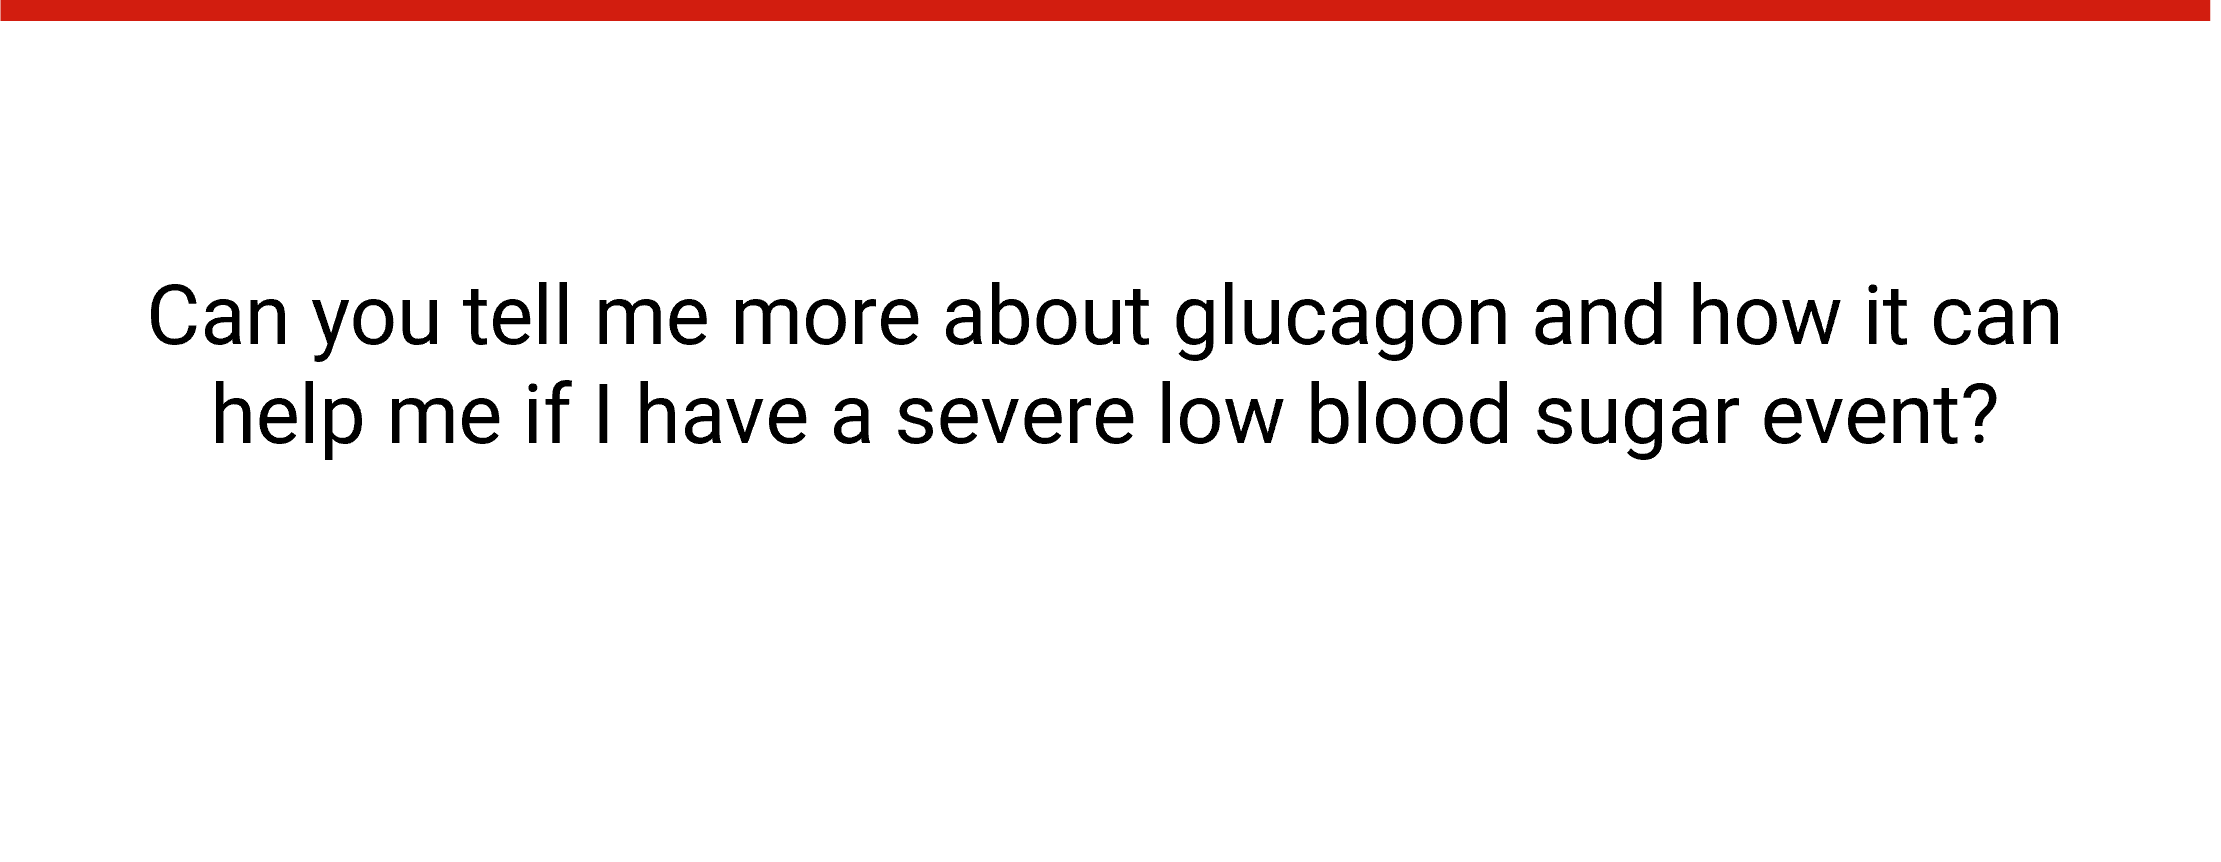 speech bubble: Can you tell me more about glucagon and how it can help me if I have a severe low blood sugar event